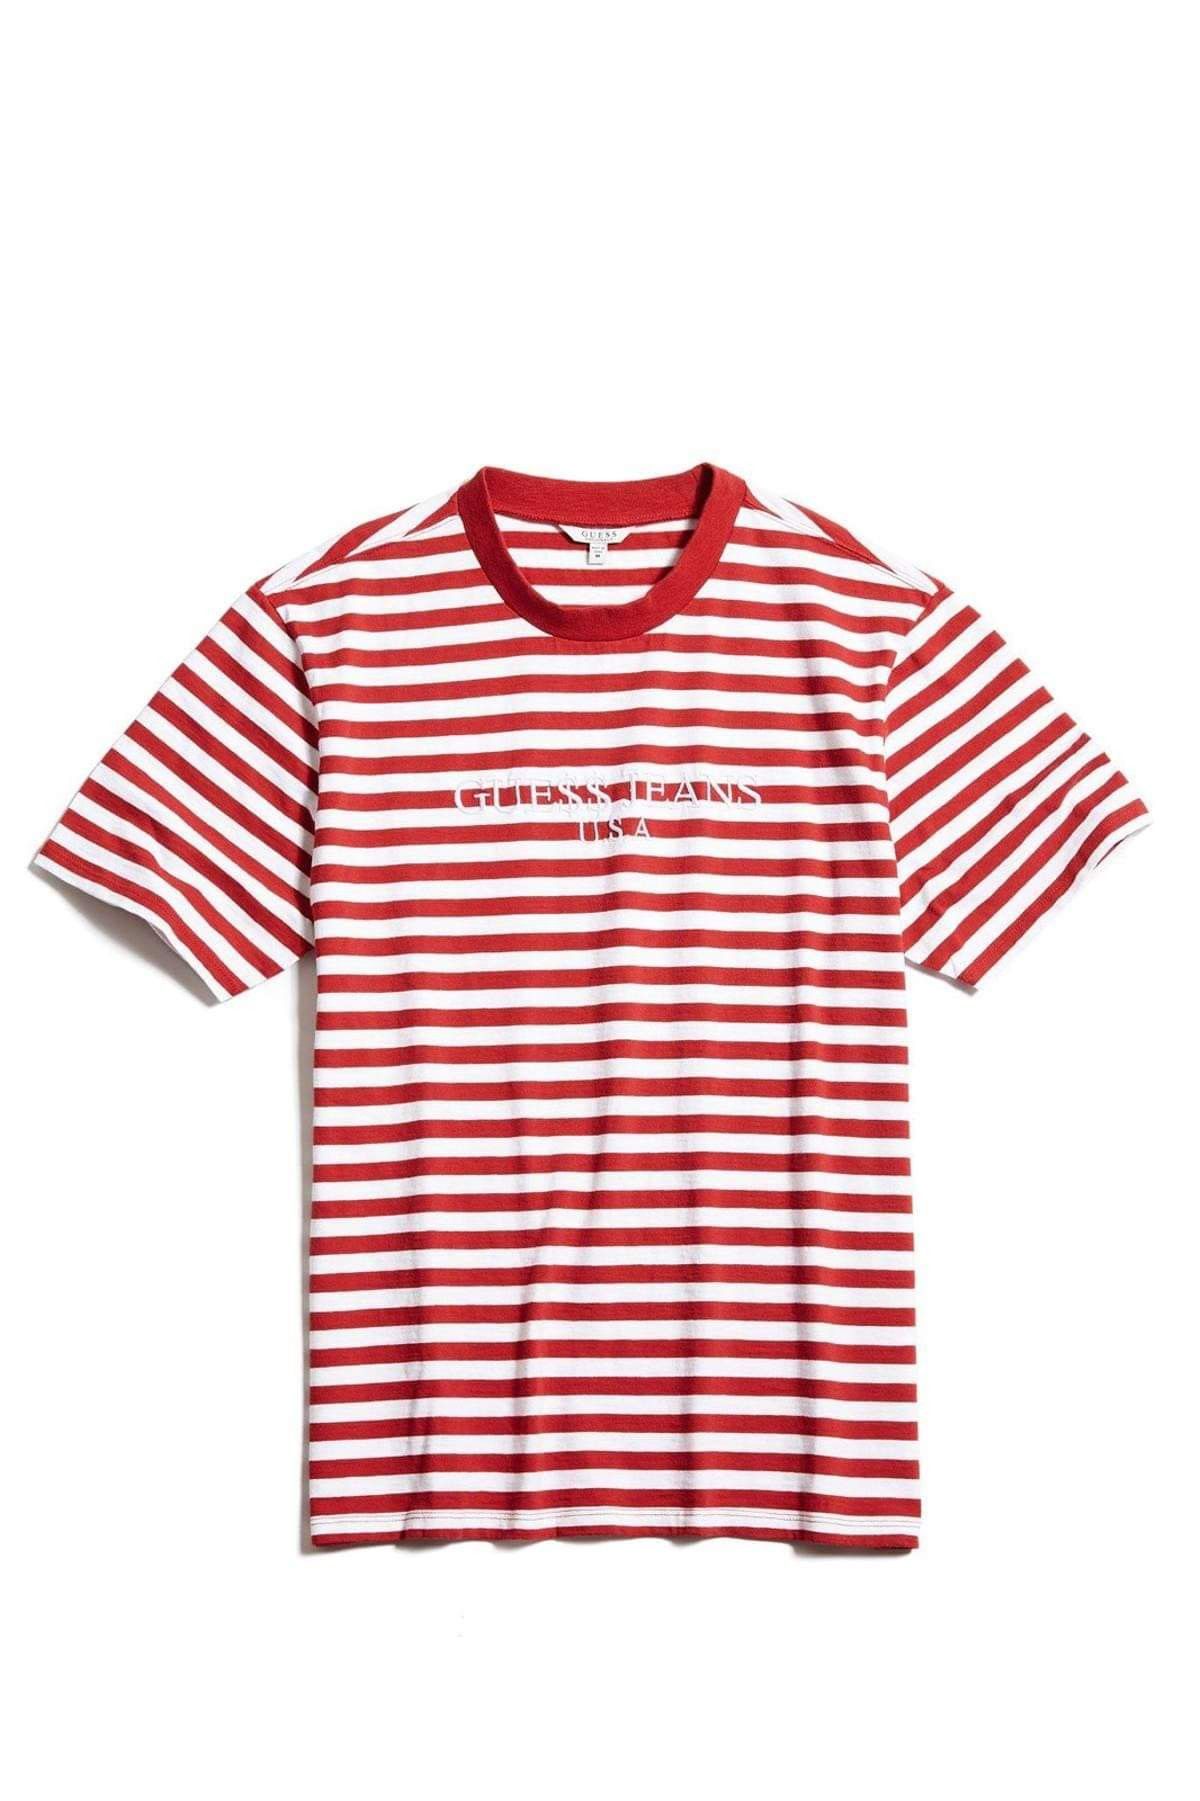 udledning affjedring Dyster Guess Asap Rocky x Guess Jeans stripes tee red white size L | Grailed